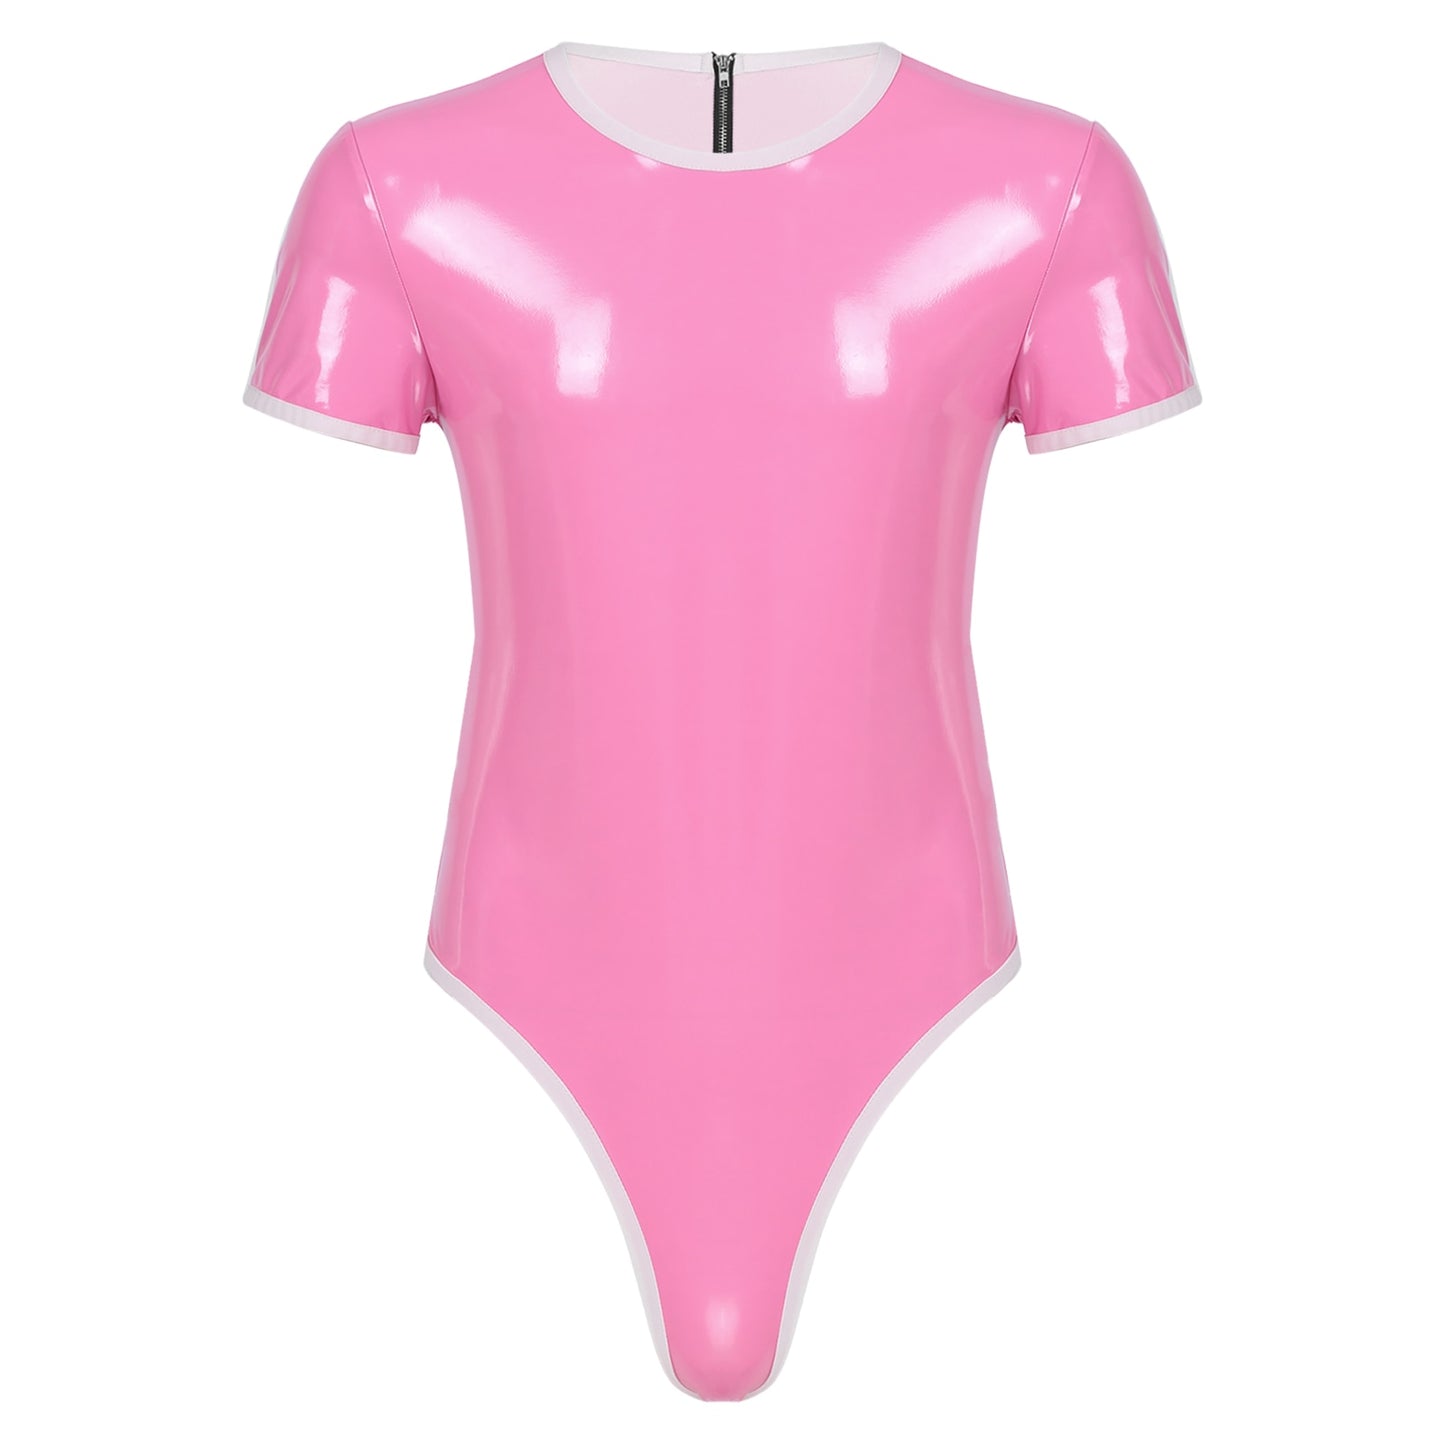 Pink Patent Leather Bodysuit: Sexy Male Sissy Lingerie